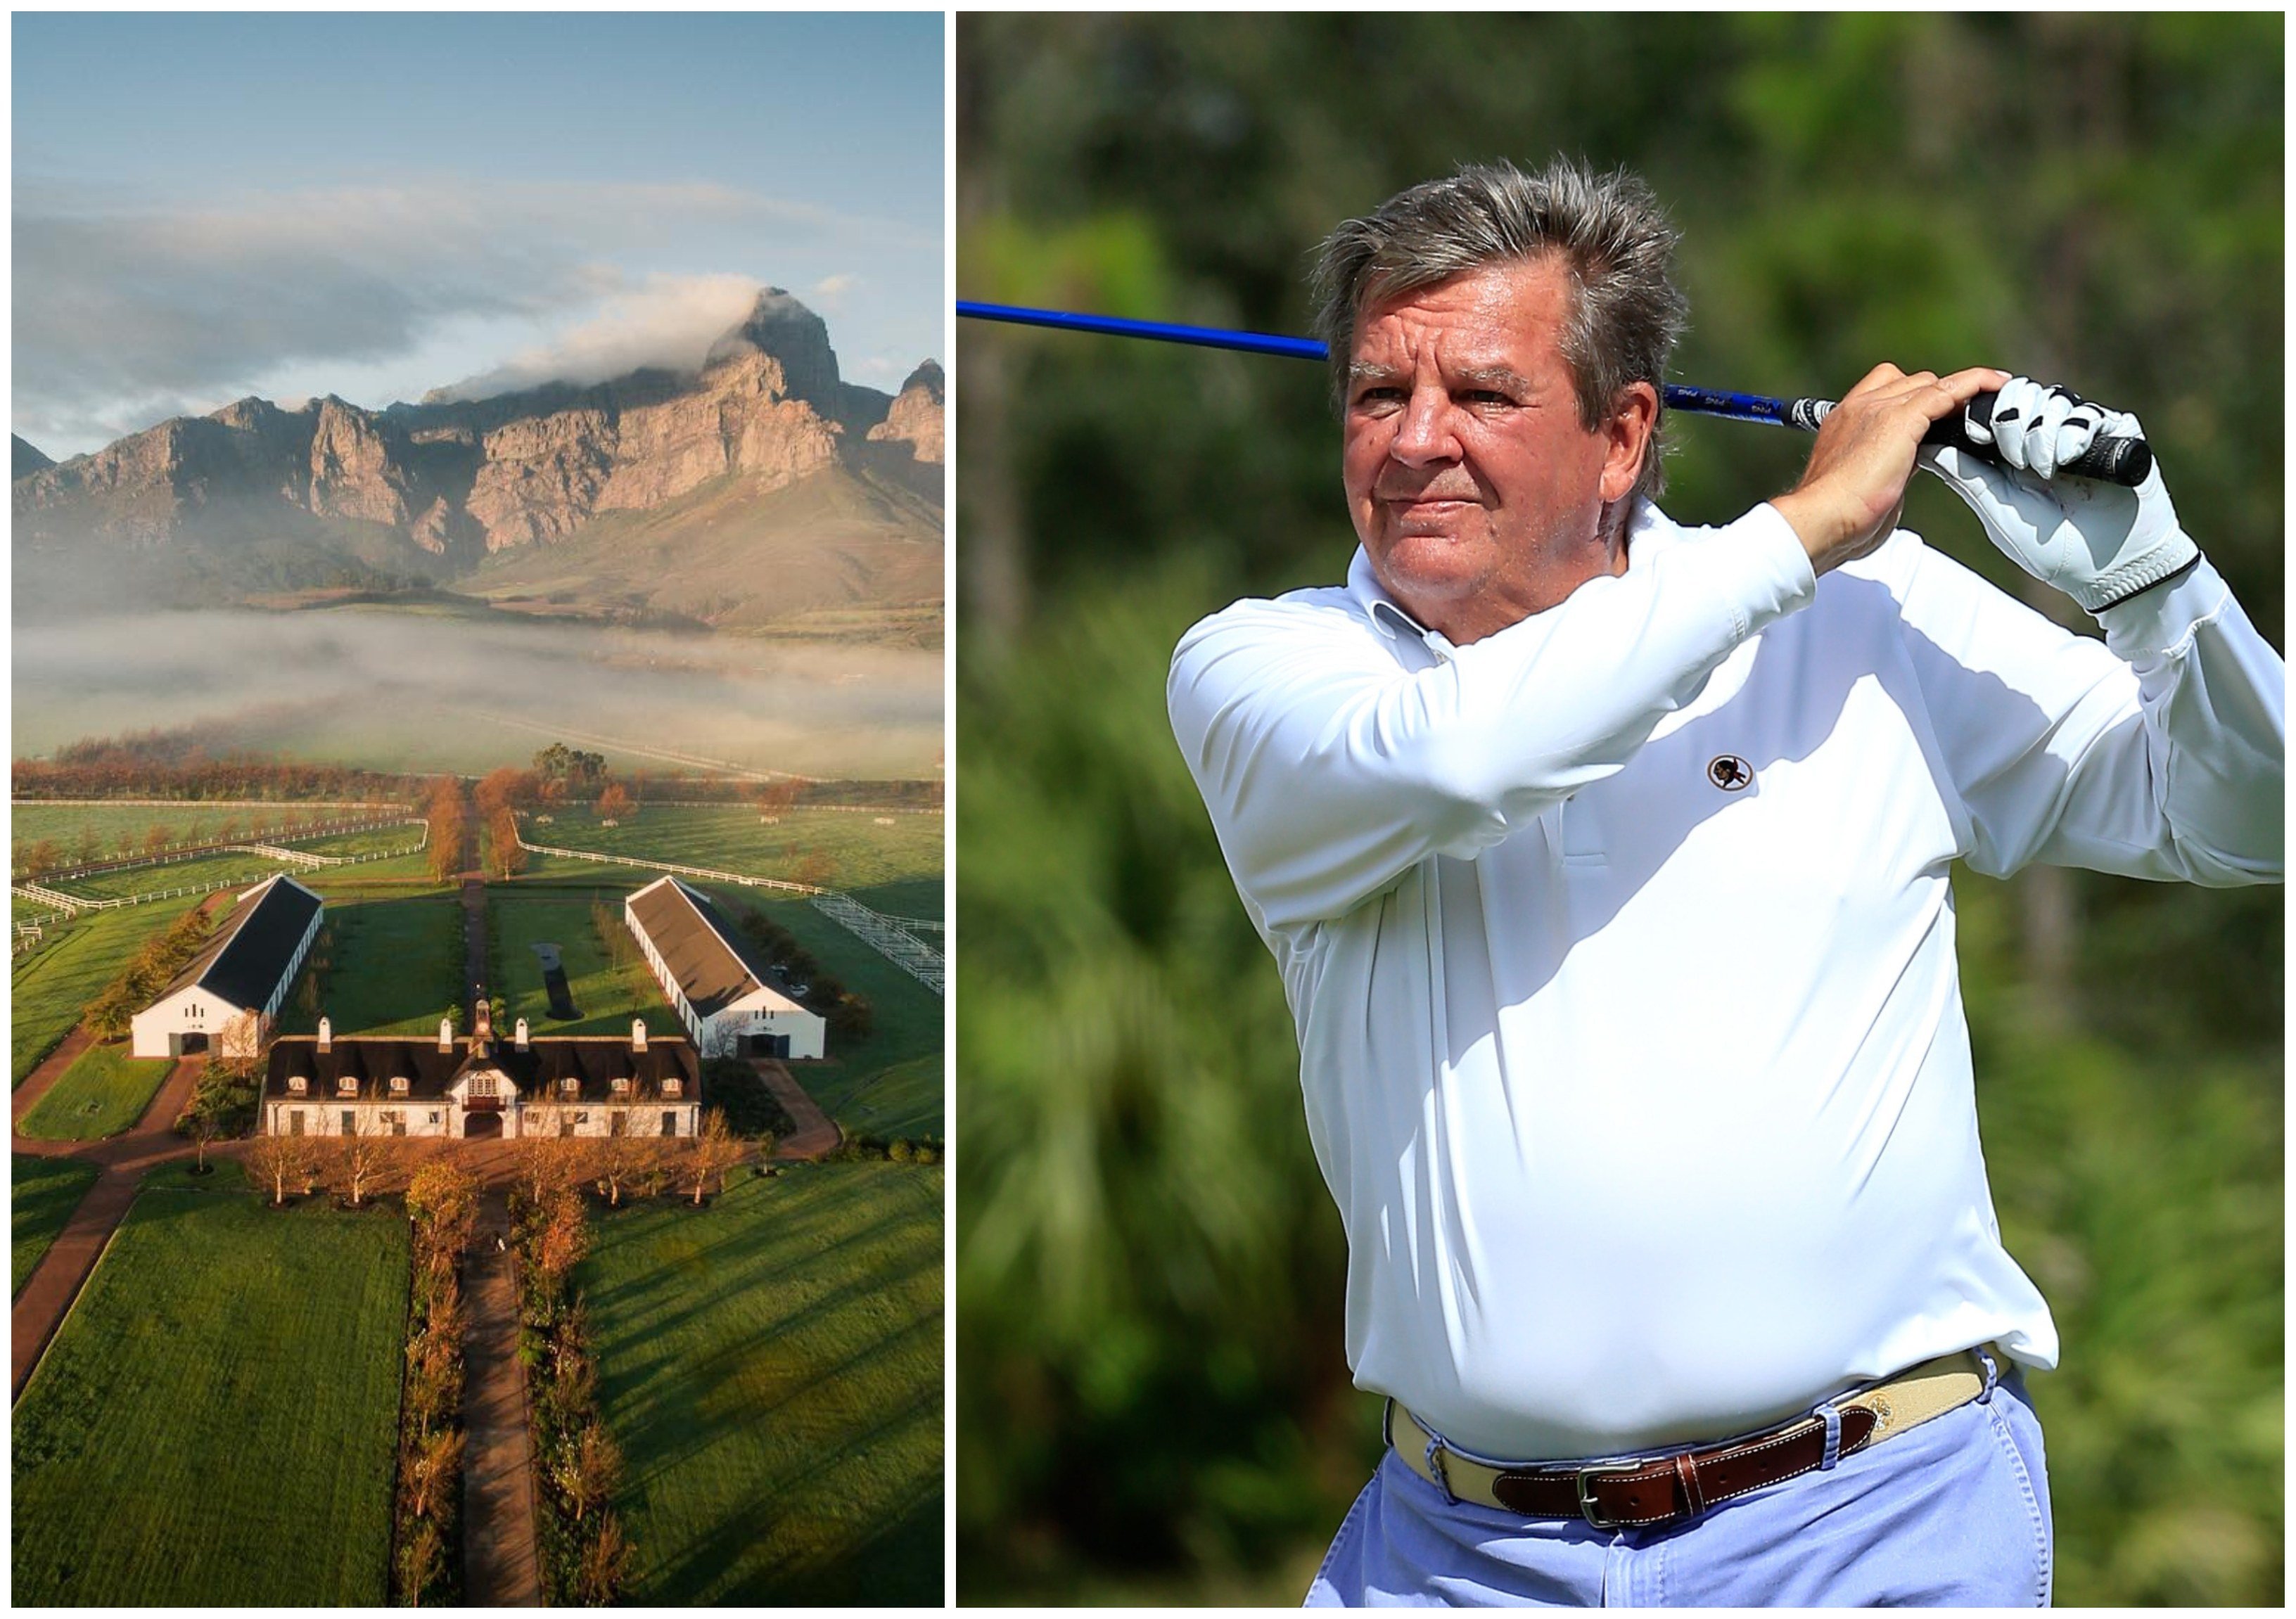 Johann Rupert is the richest man in South Africa and spends his billions on sports, mansions and other luxuries. Photos: @Drakenstein Stud/Facebook, AFP